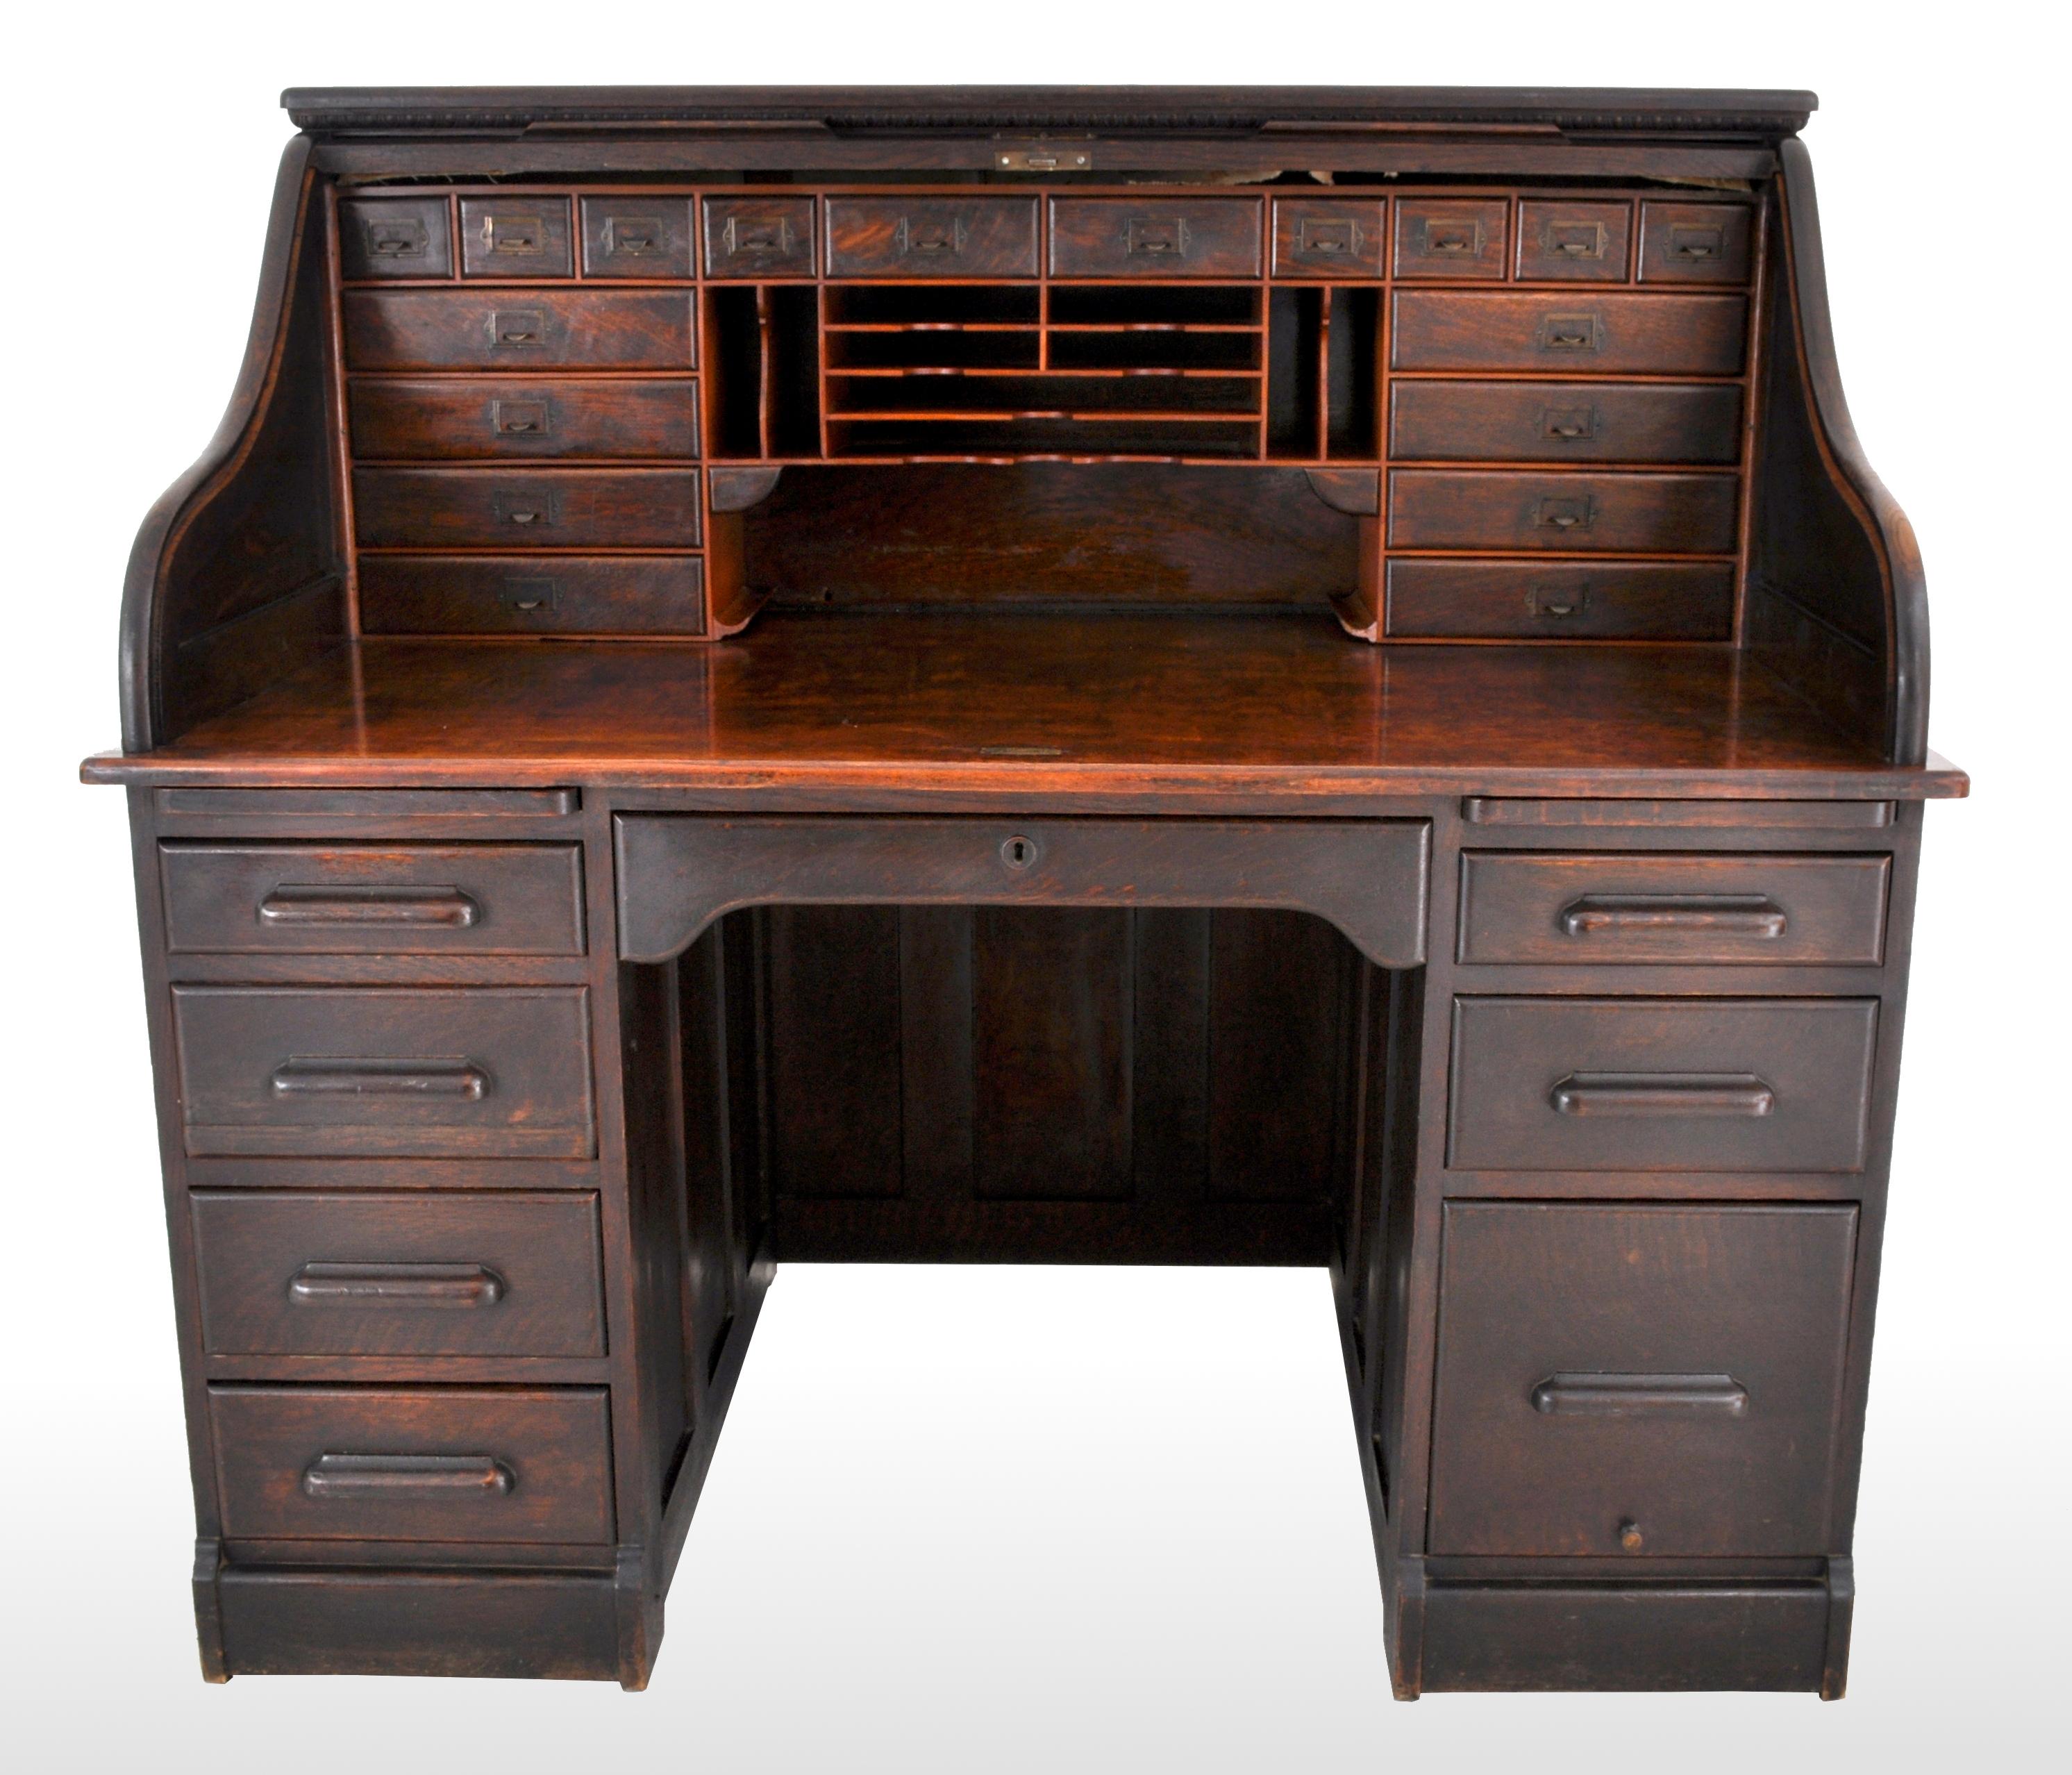 A good antique American oak roll top 's Curve' Tambor desk, circa 1880. The desk having a band of 'egg & dart' molding with a pronounced 's Curve' tambor below. The roll top enclosing a bank of 17 drawers and vertical and lateral files and two